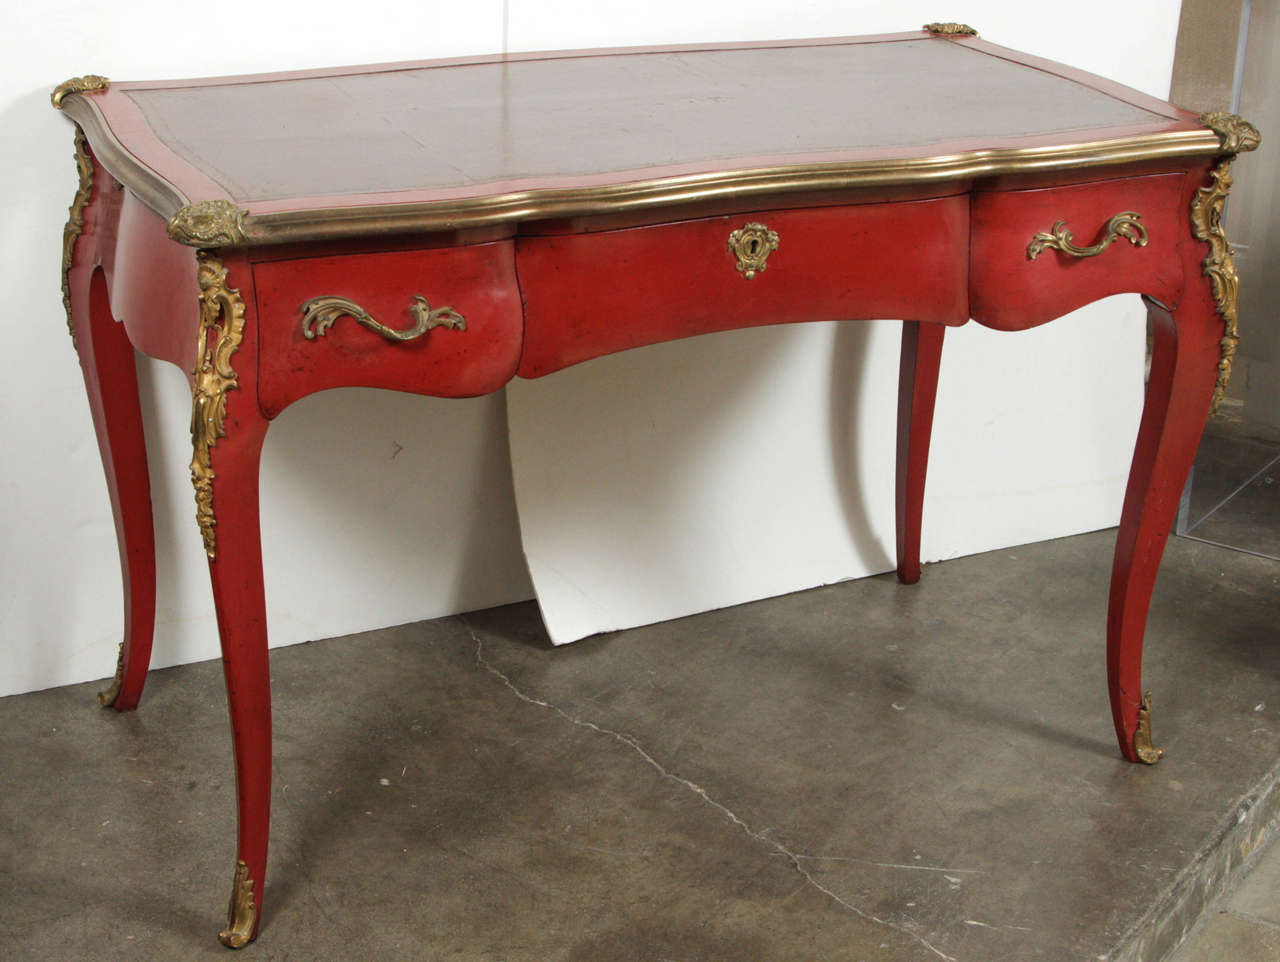 Lacquered, crimson, three-drawer, serpentine desk with ormolu lip, handles and embellishments and hand-tooled, leather top.